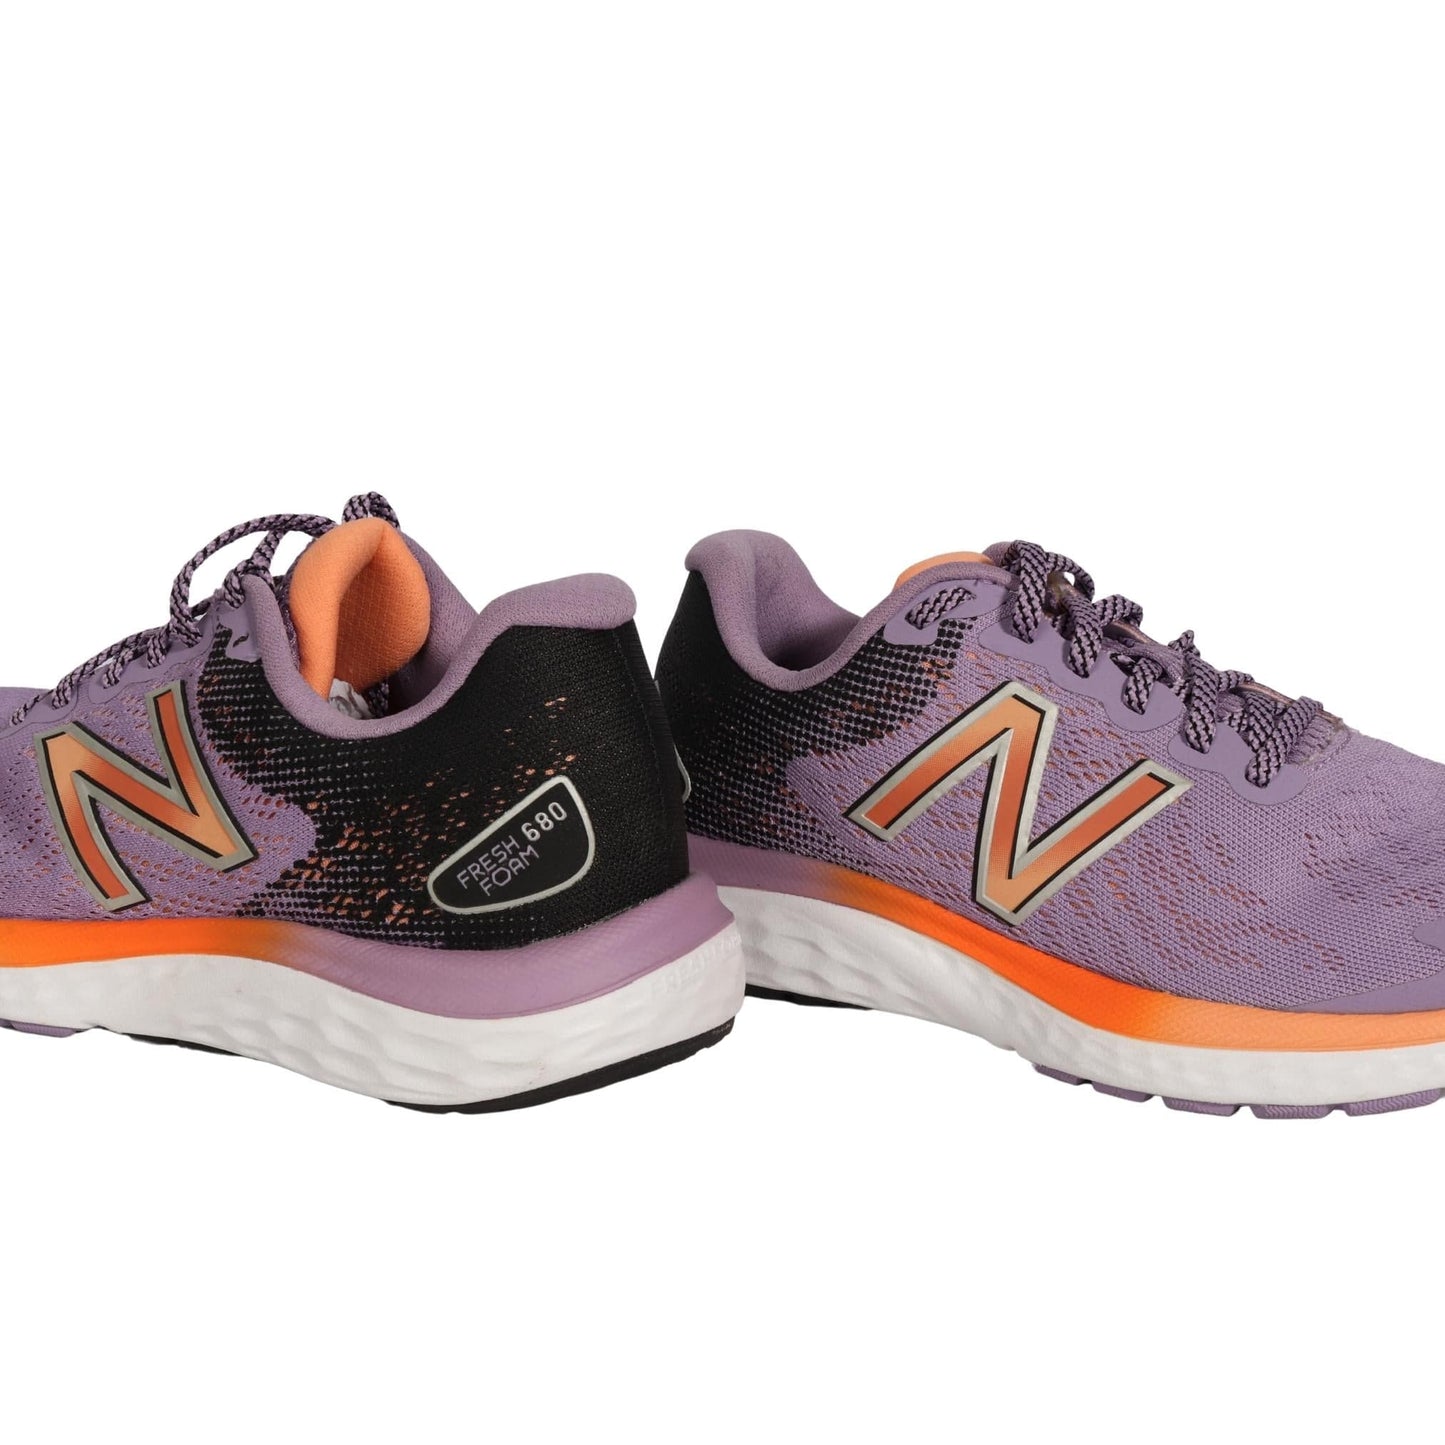 NEW BALANCE Athletic Shoes 37.5 / Purple NEW BALANCE - Casual Athletic Shoes